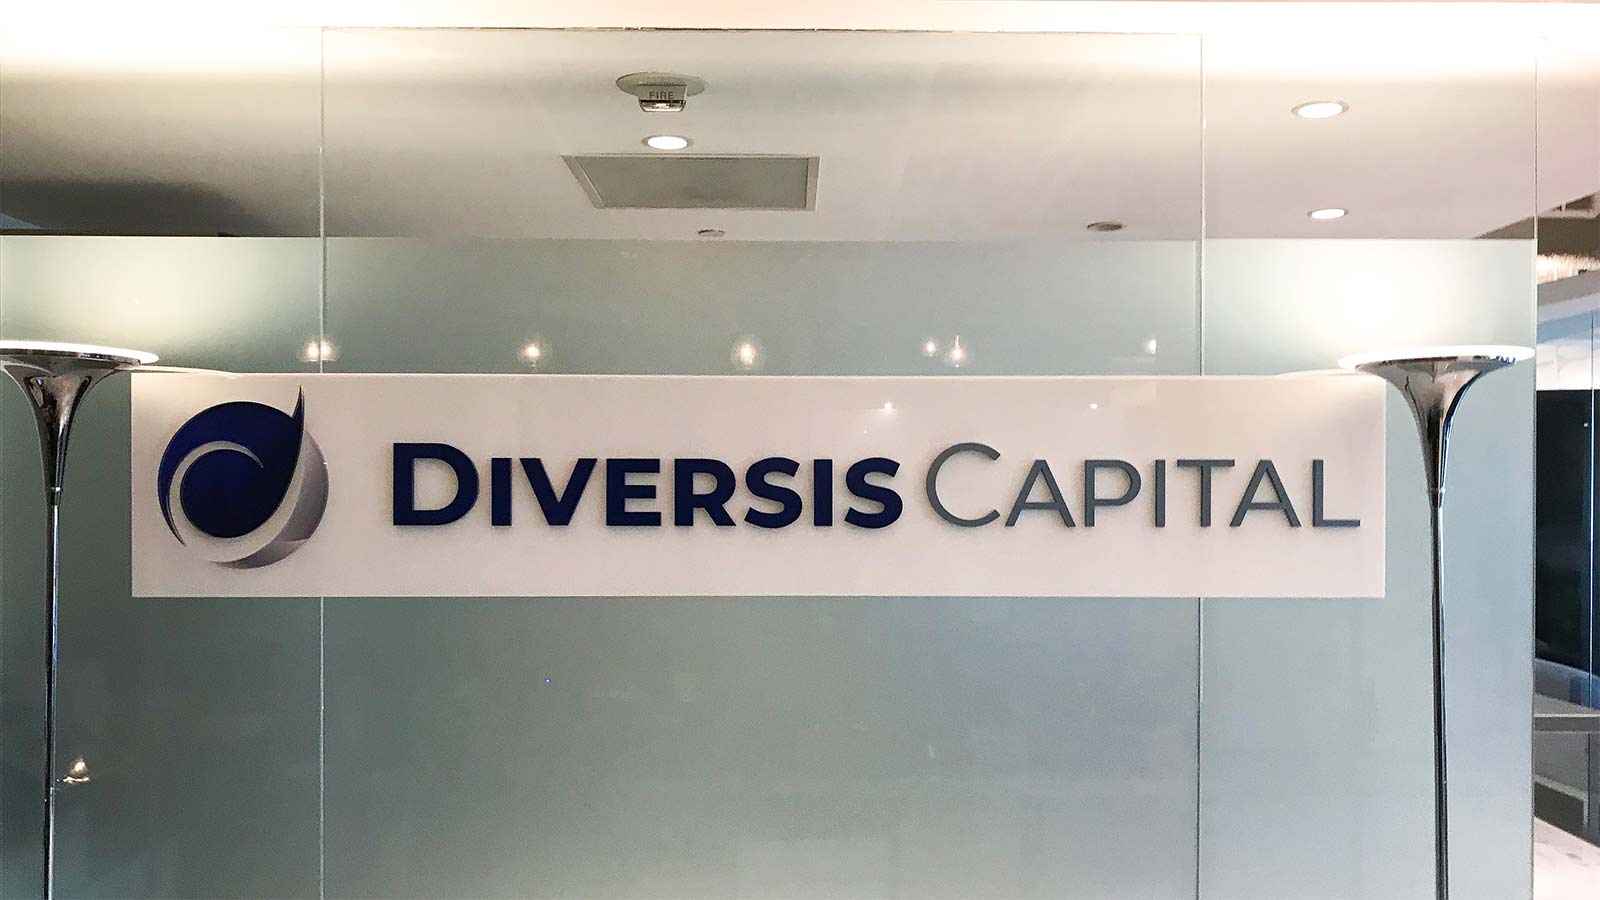 diversis capital dimensional acrylic office sign